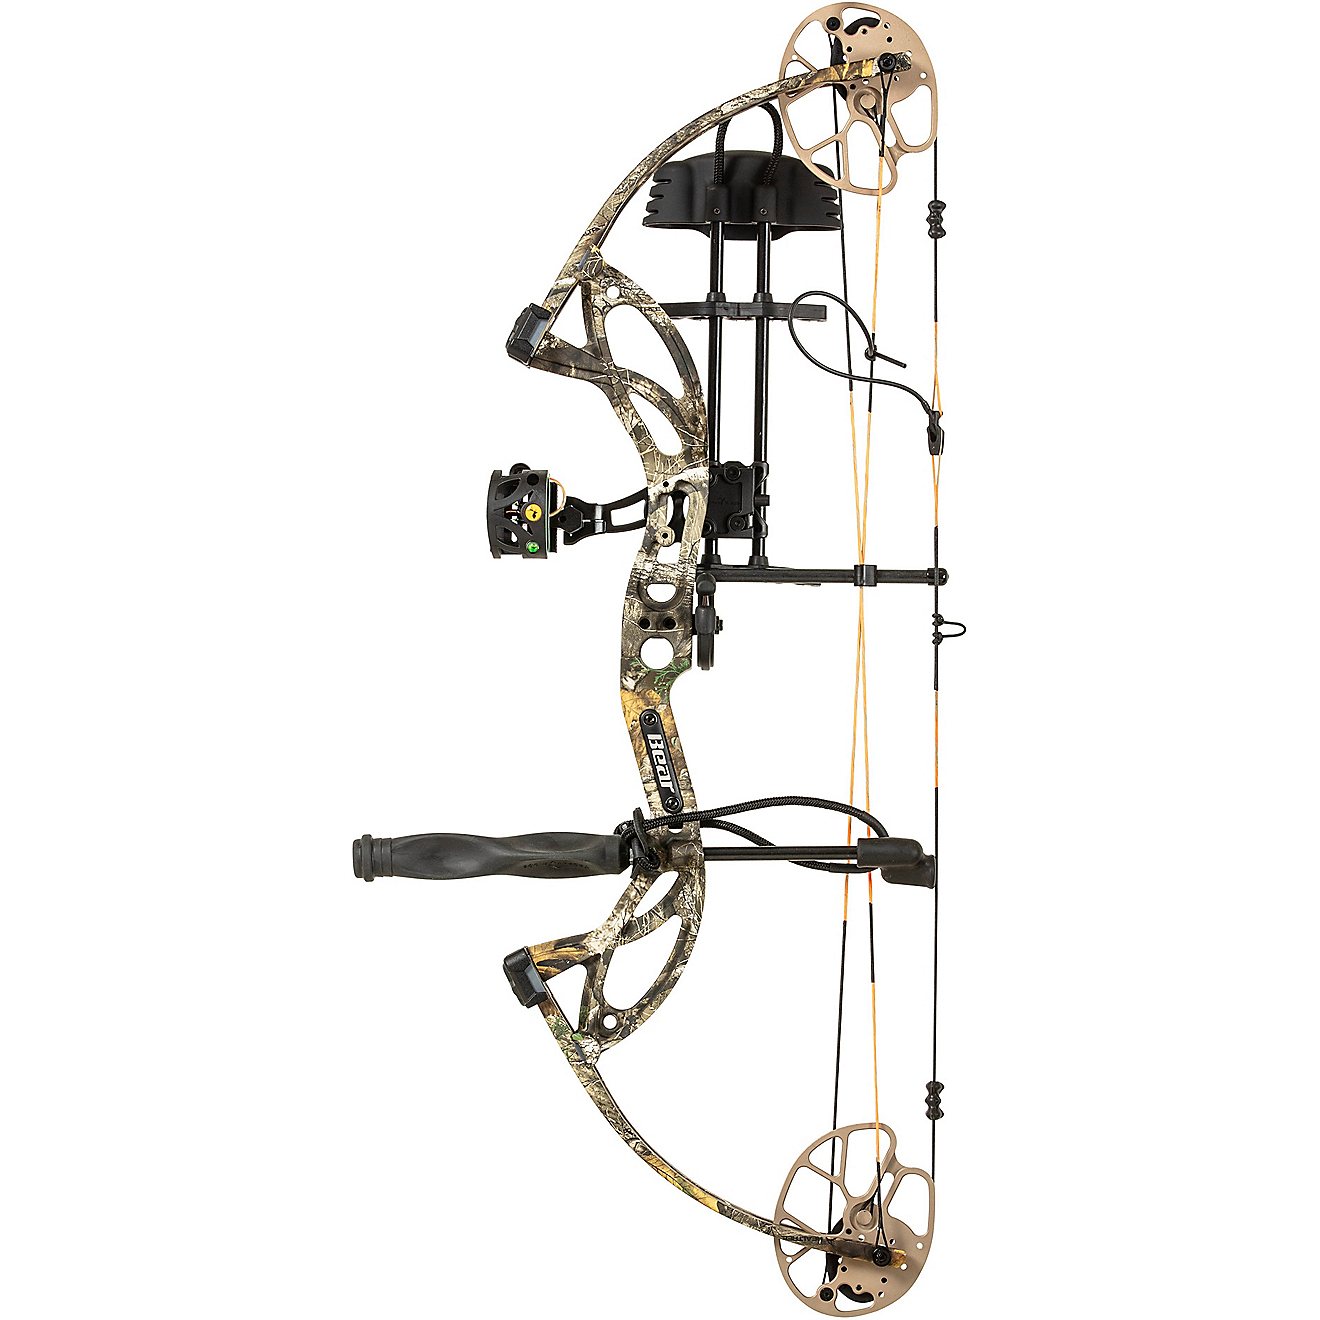 Bear Archery Cruzer G2 Ready to Hunt Compound Bow Package                                                                        - view number 2